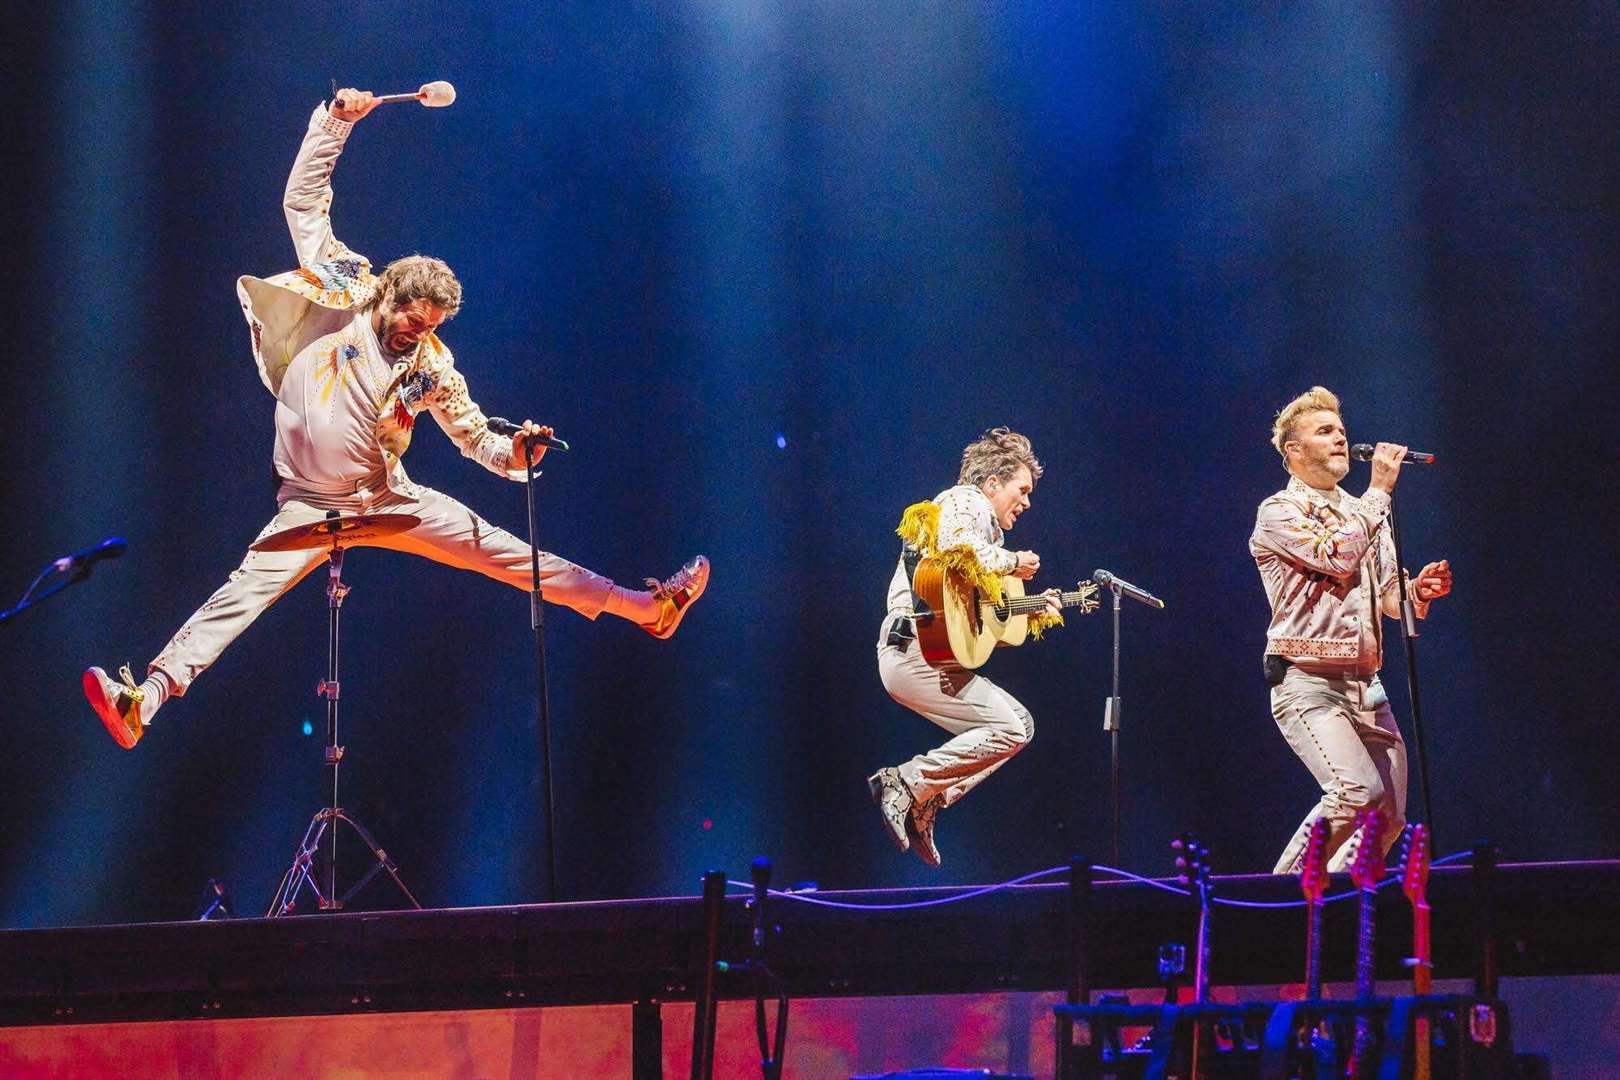 Take That's concert will be live streamed at Vue (7857899)